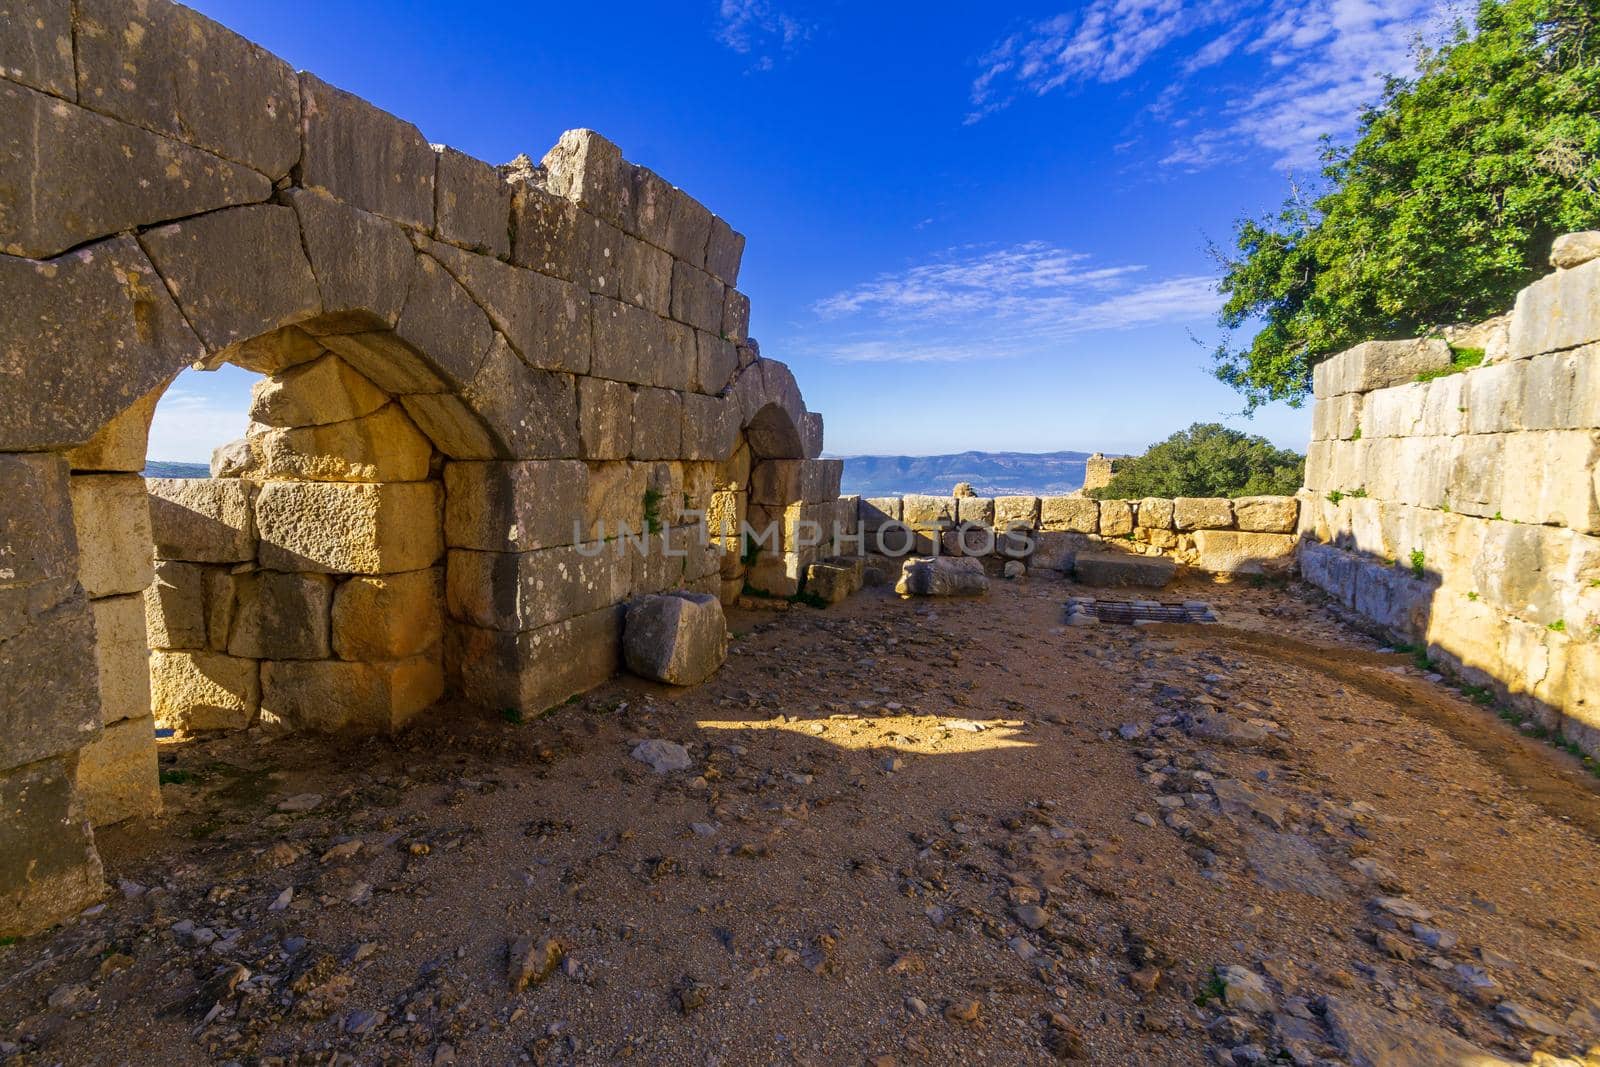 View of a guard tower, in the Medieval Nimrod Fortress, the Golan Heights, Northern Israel